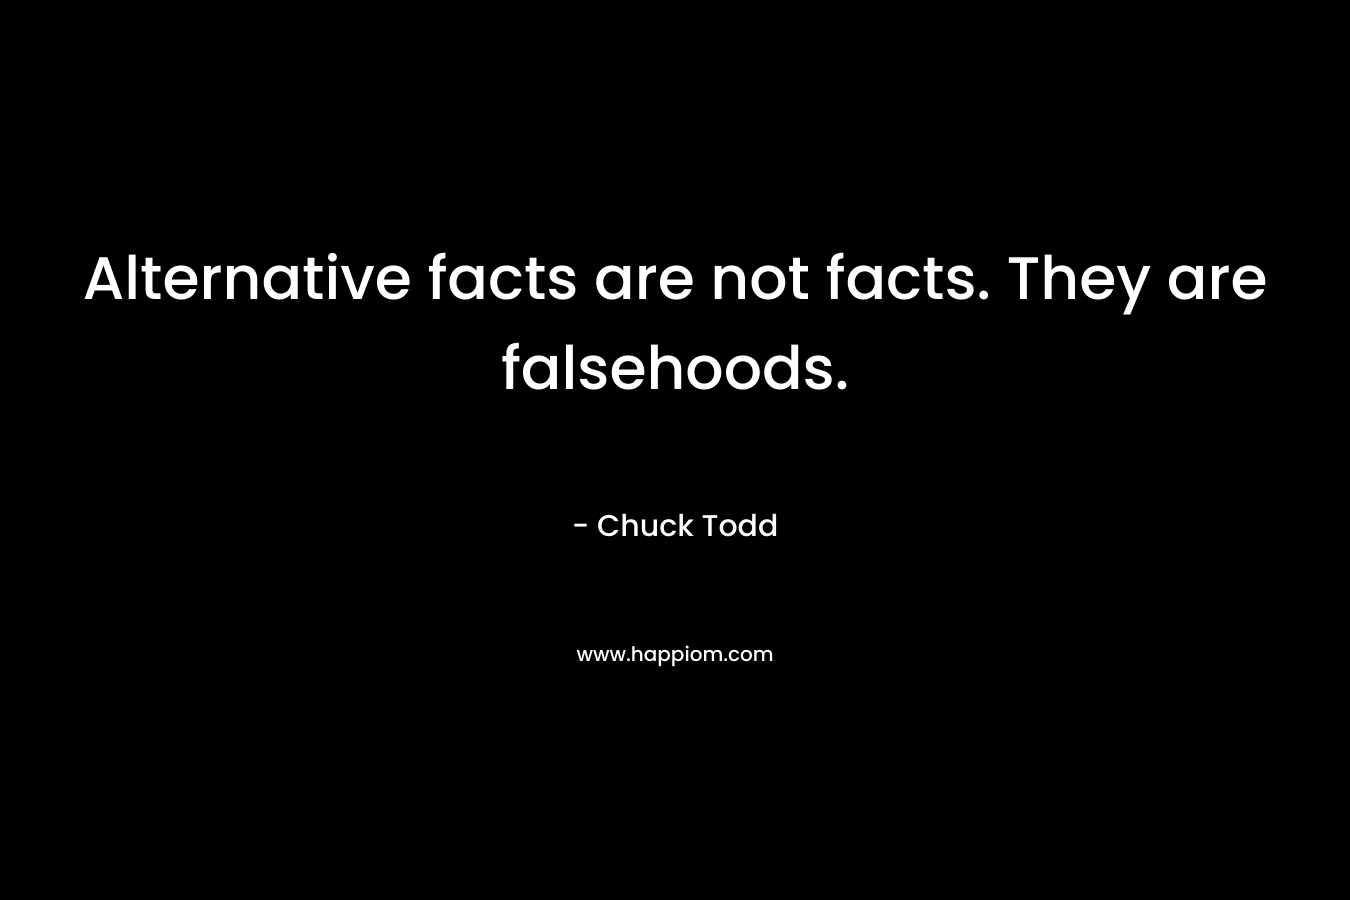 Alternative facts are not facts. They are falsehoods.